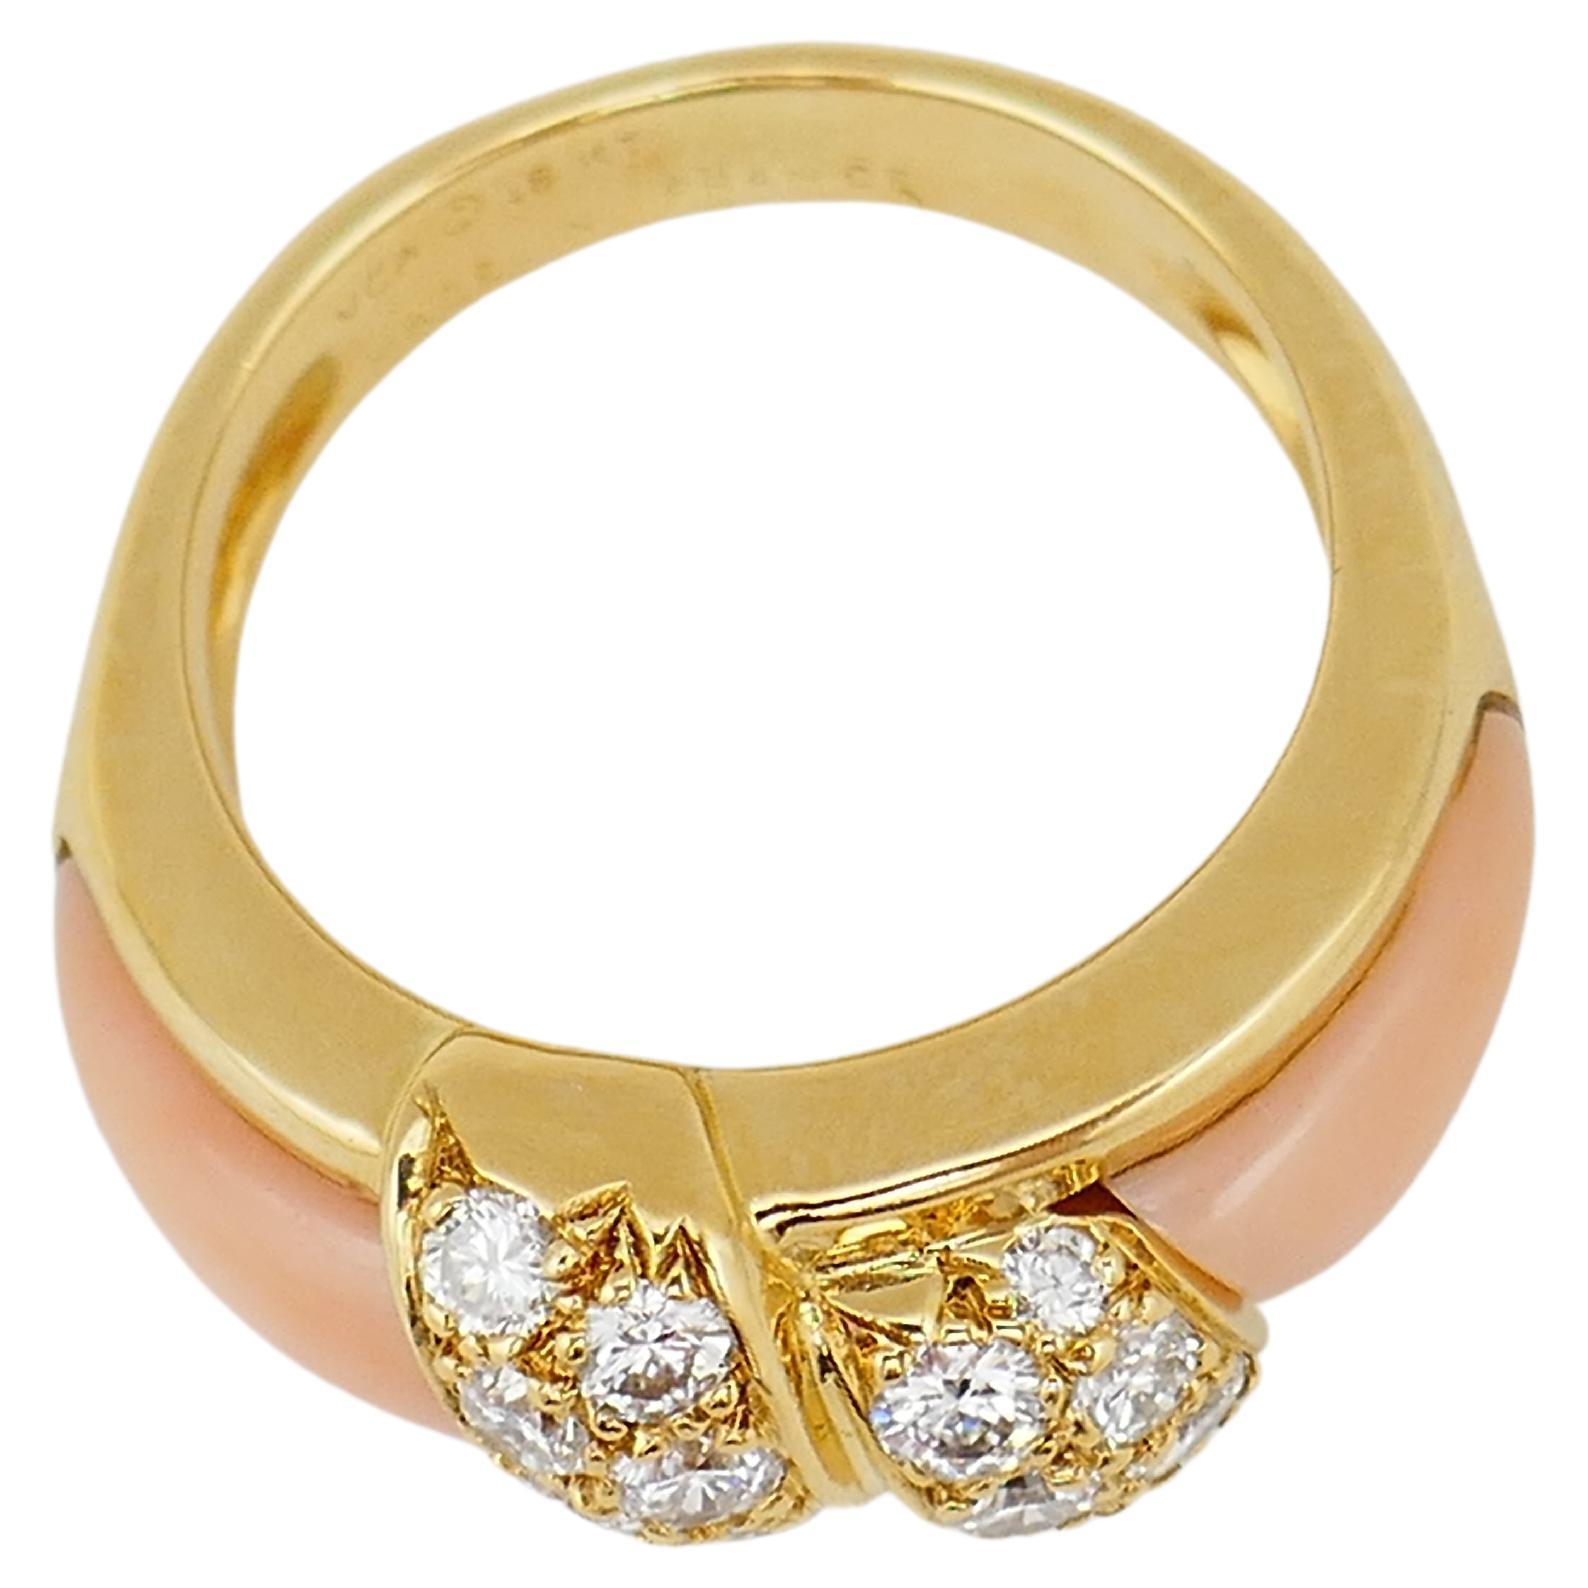 A gorgeous vintage ring by Van Cleef & Arpels. Made of 18k gold, coral and diamond. Diamonds are round brilliant cut, total carat weight is 0.36 points. 
Stamped with VCA maker's mark, French marks and written country of origin (France), a hallmark